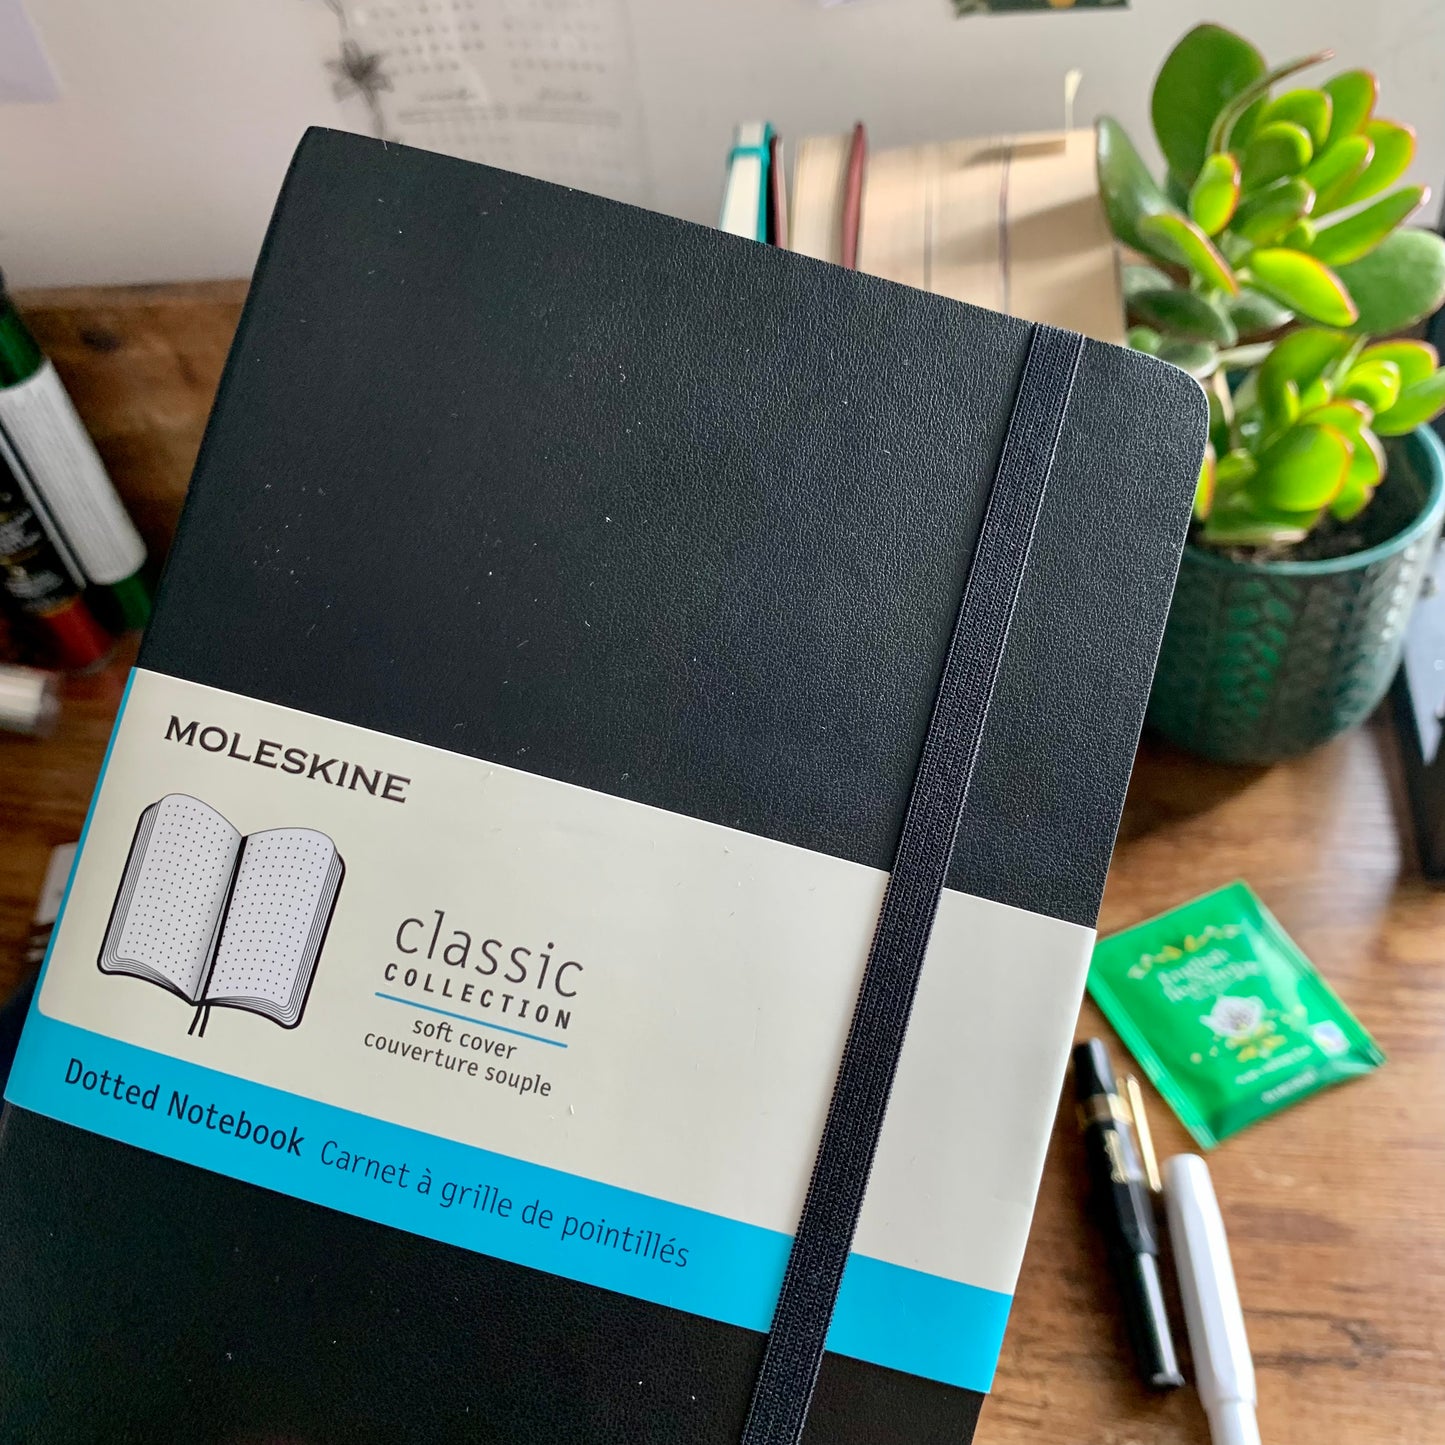 Moleskine - Classic Expanded Dotted Paper Notebook - Soft Cover and Elastic Closure Journal - Color Black - Size Large 13 x 21 A5 - 400 Pages